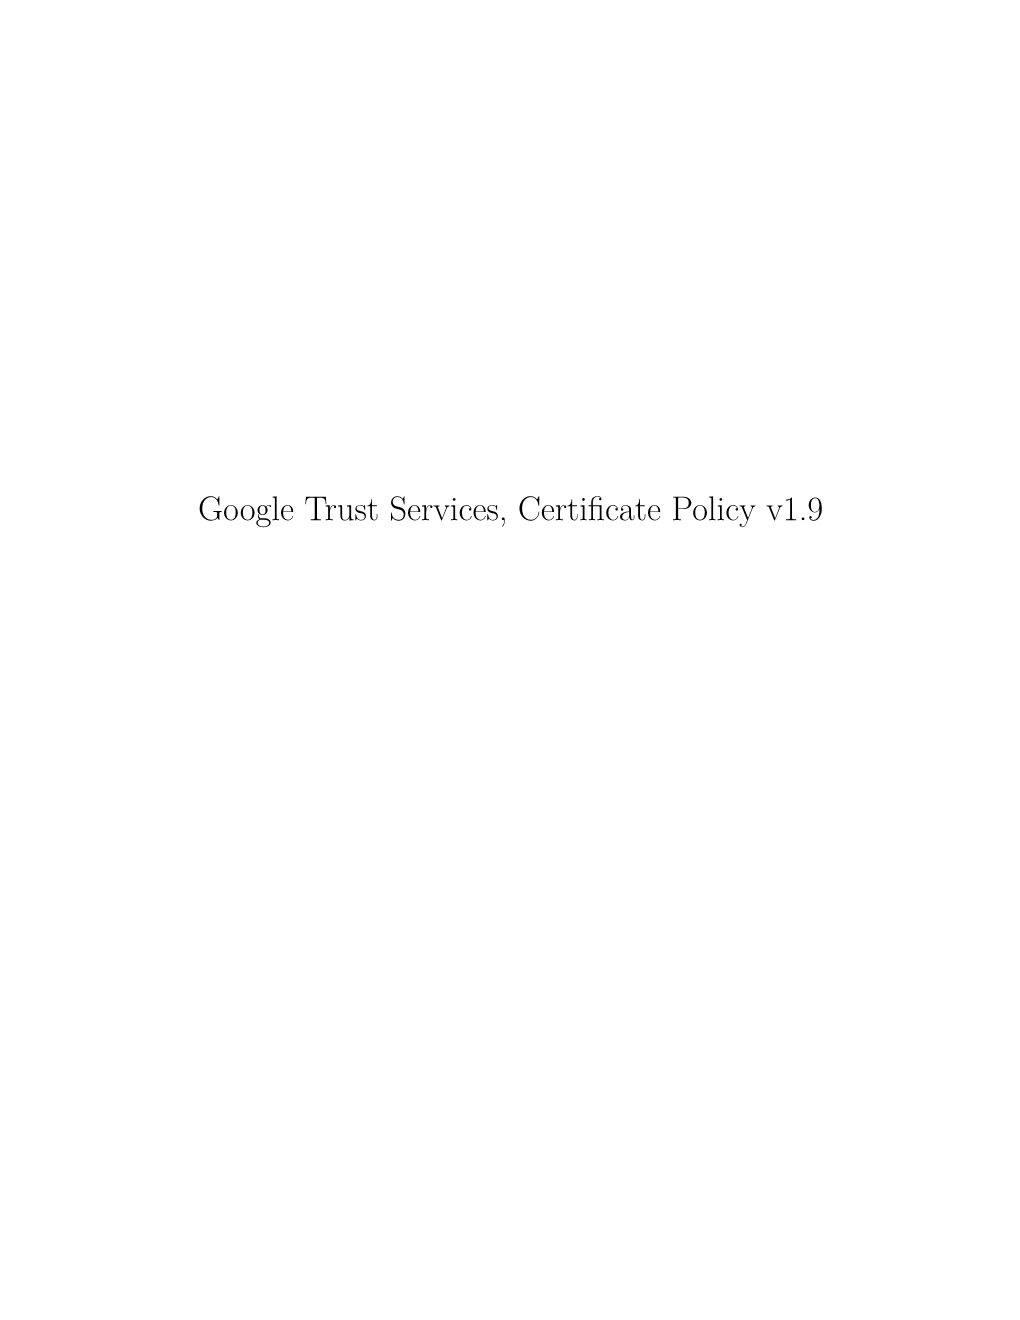 Google Trust Services, Certificate Policy V1.9 Contents